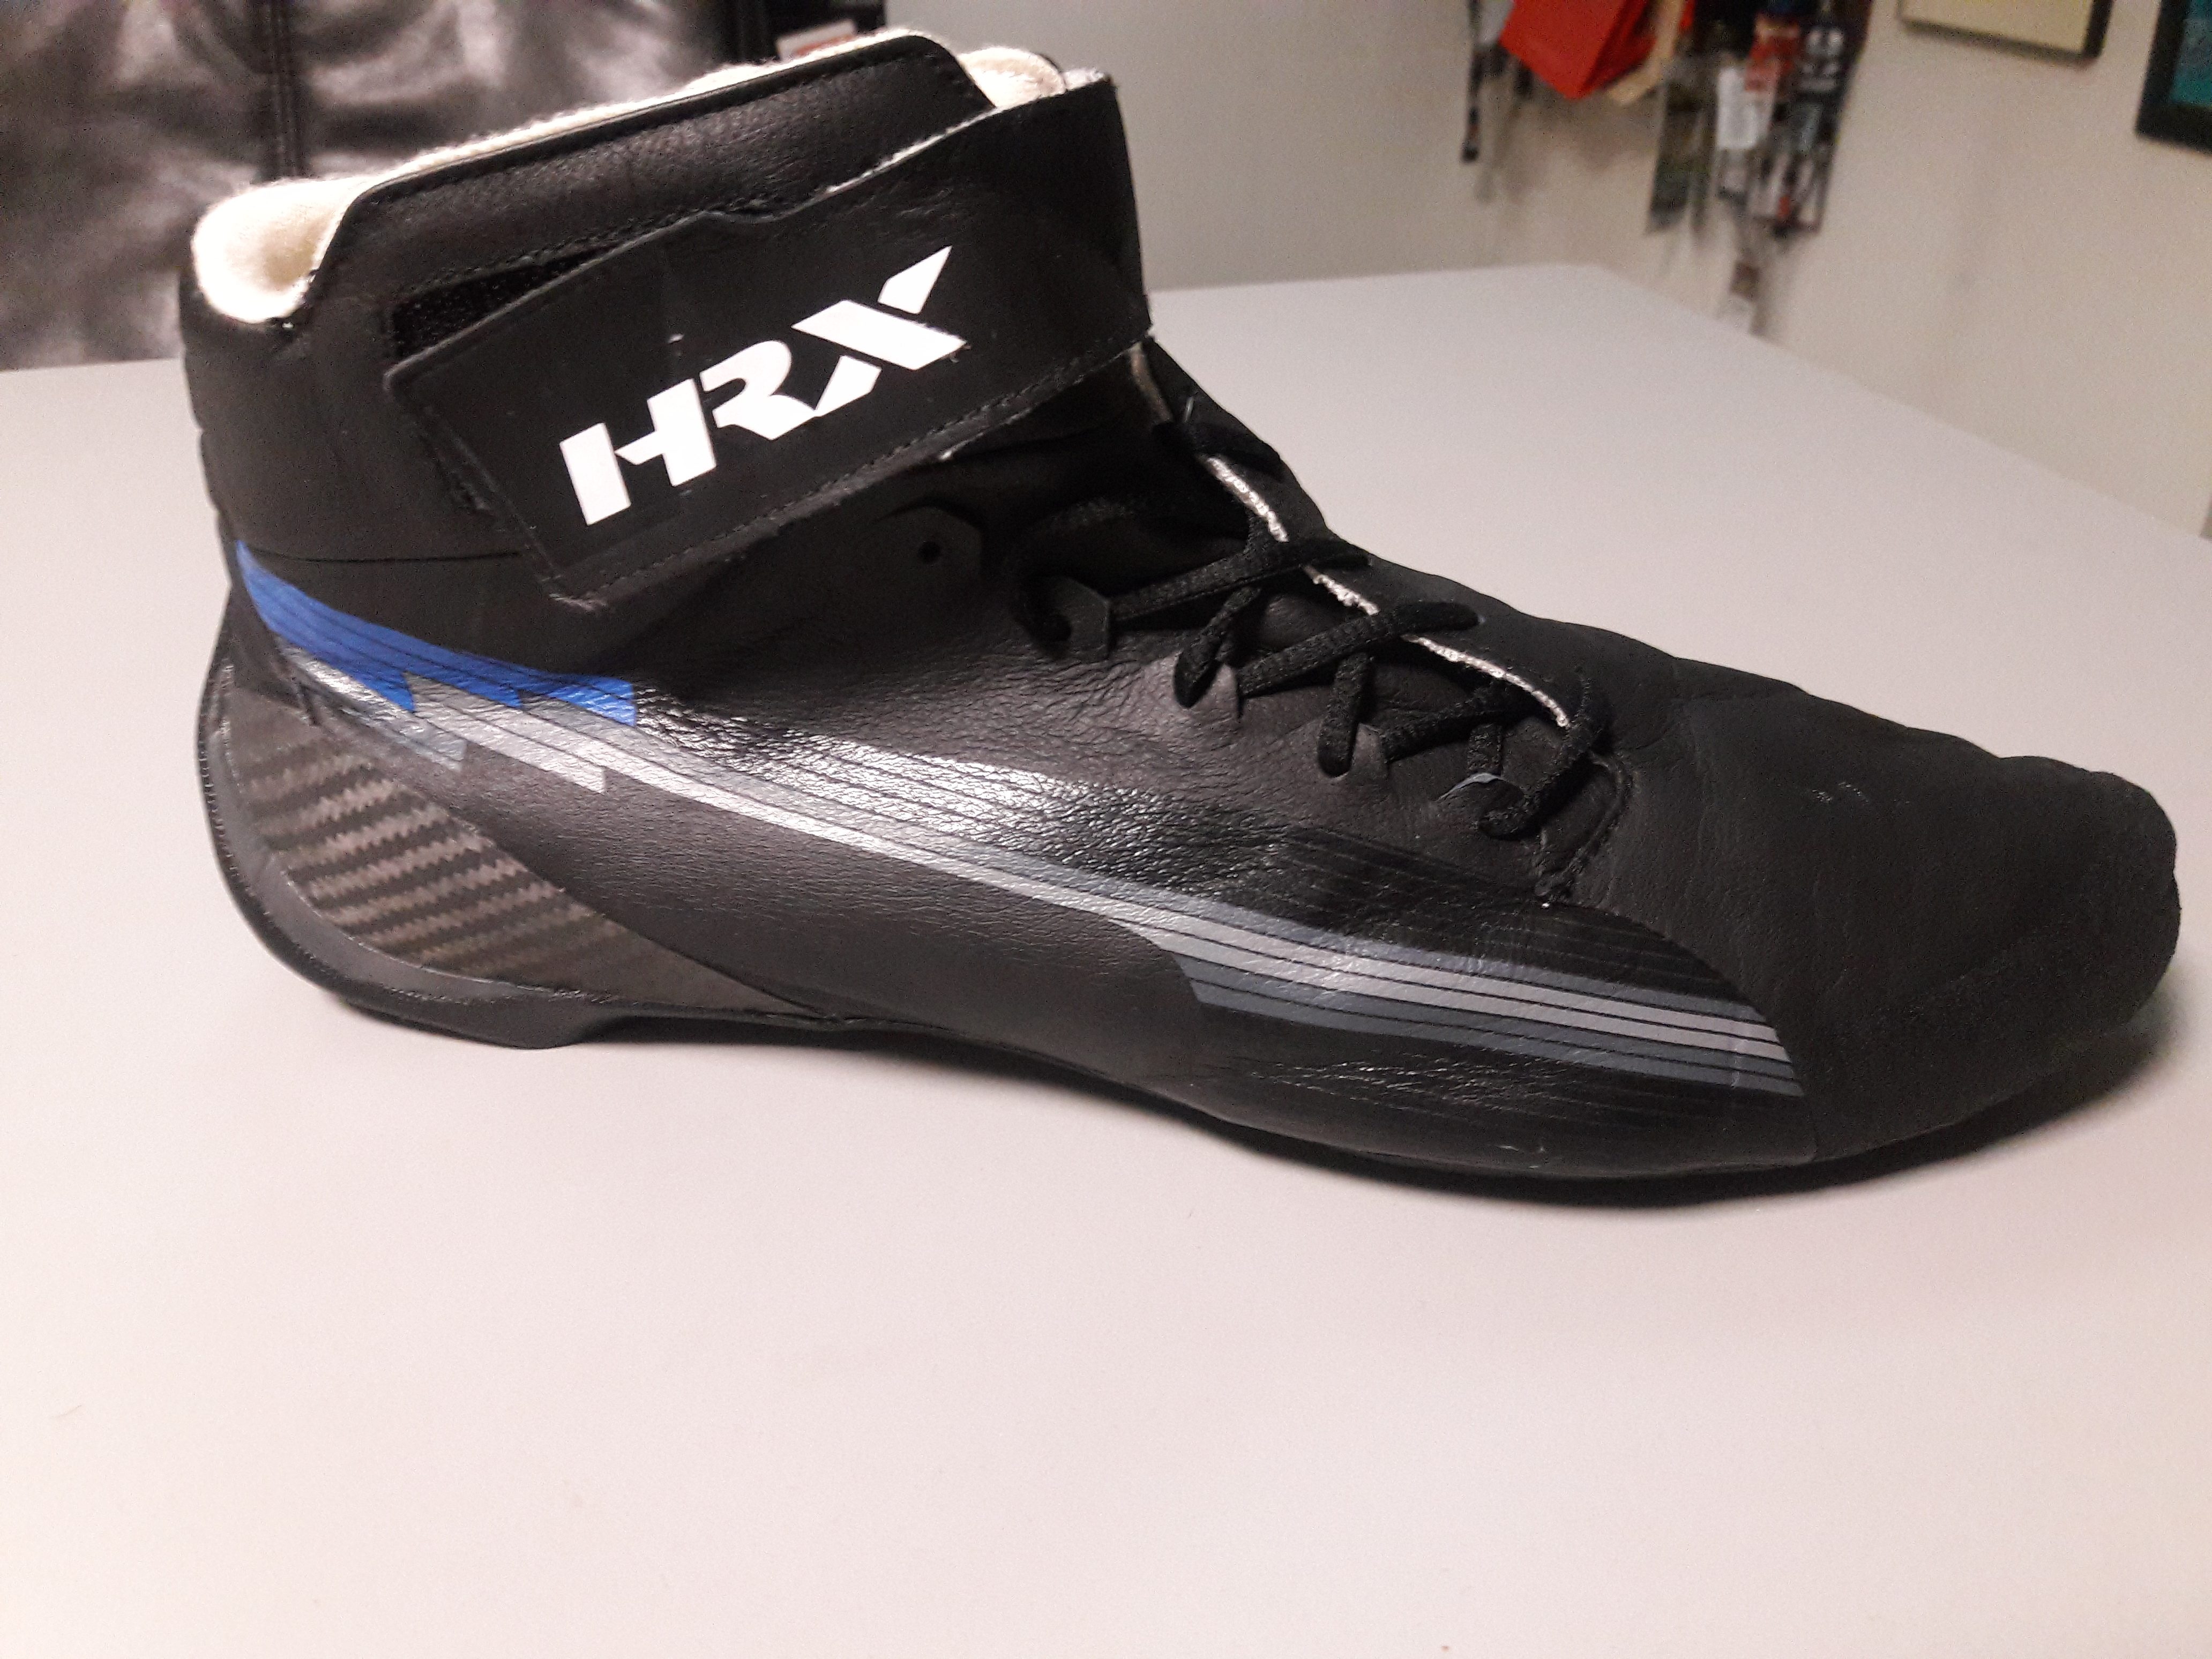 hrx shoes offer